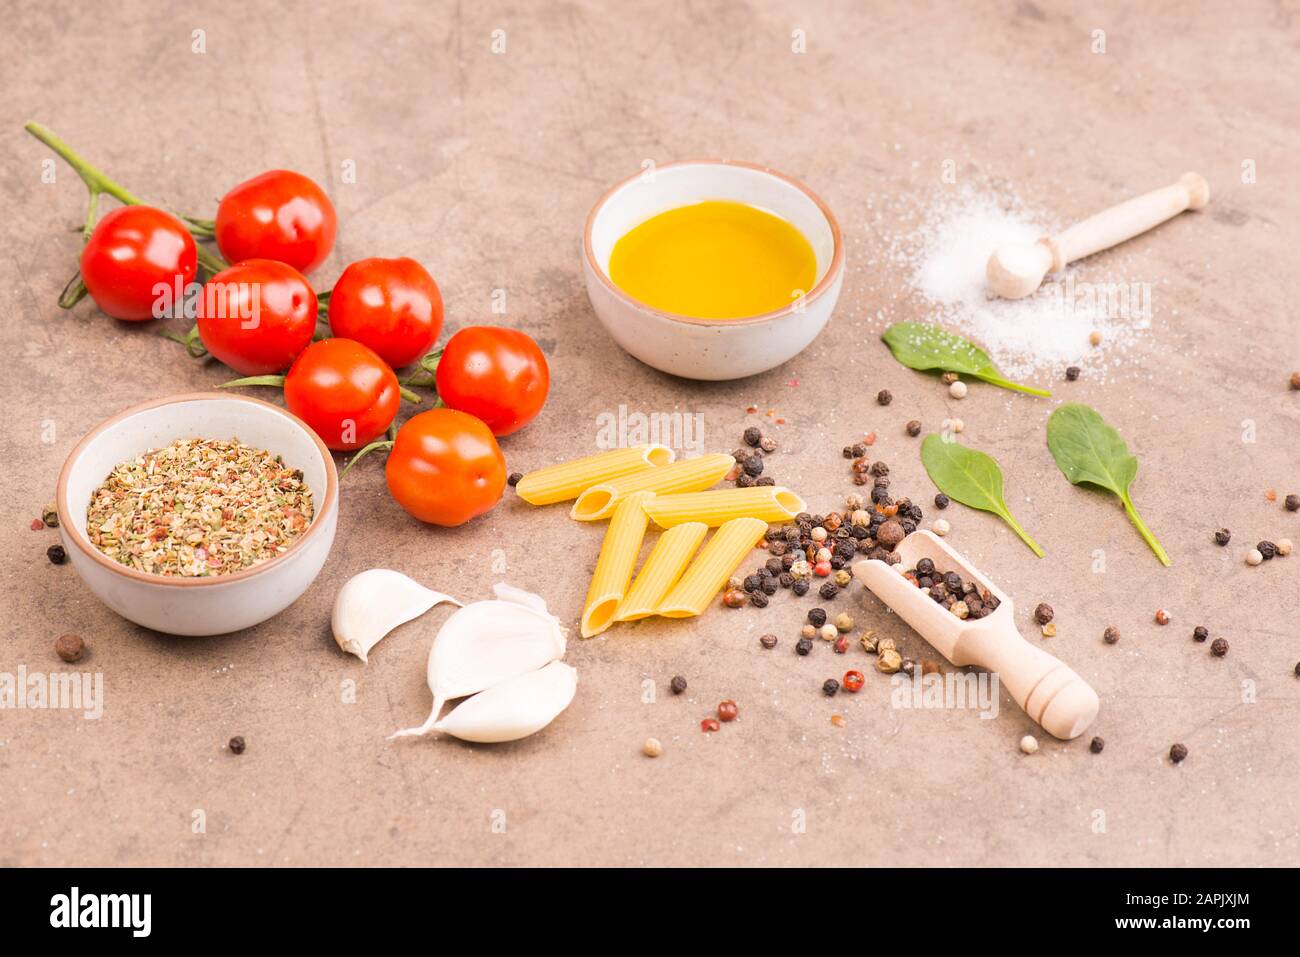 Pasta, tomatoes, italien spices, garlic, pepper corns and olive oil on a brown textured background Stock Photo